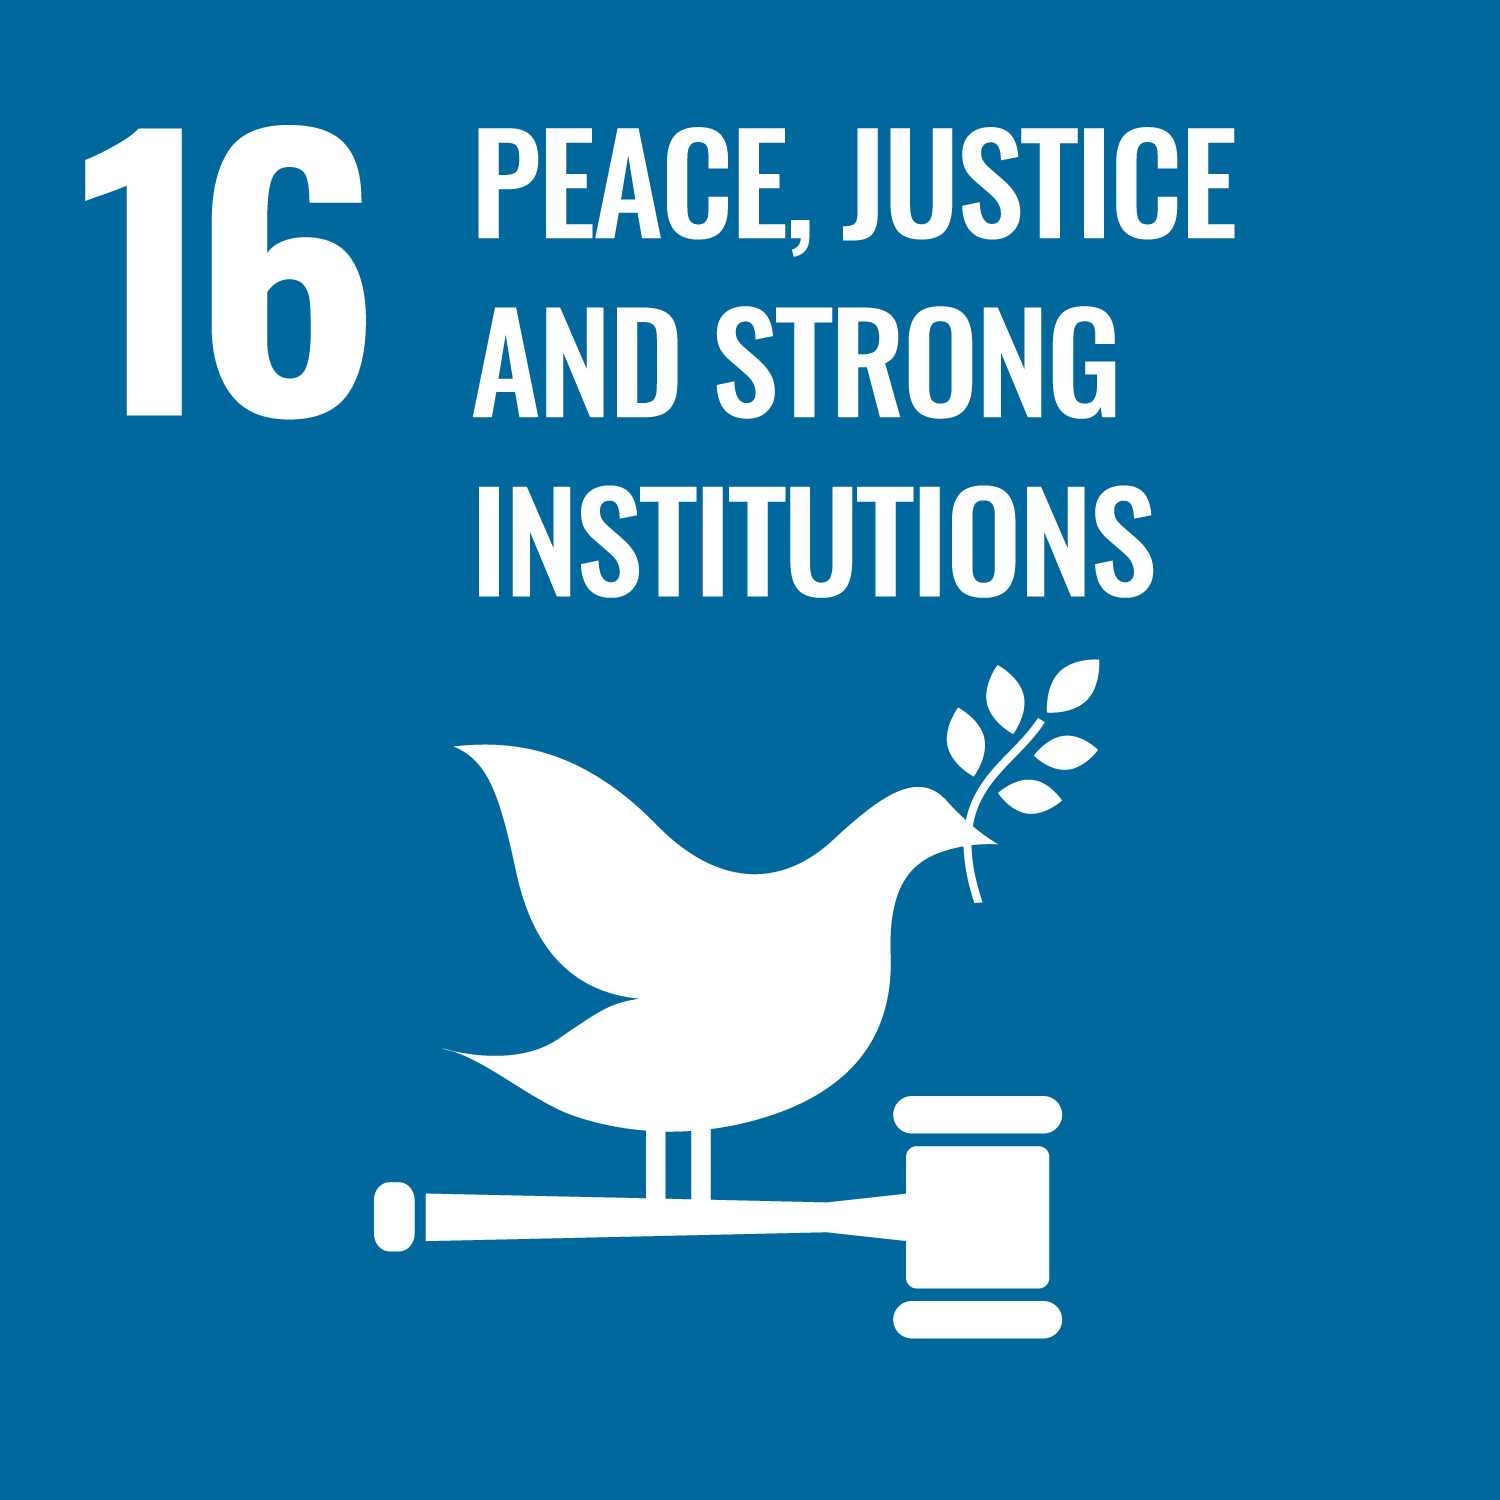 UN Sustainable Development Goal 16: Peace, Justice, and Strong Institutions